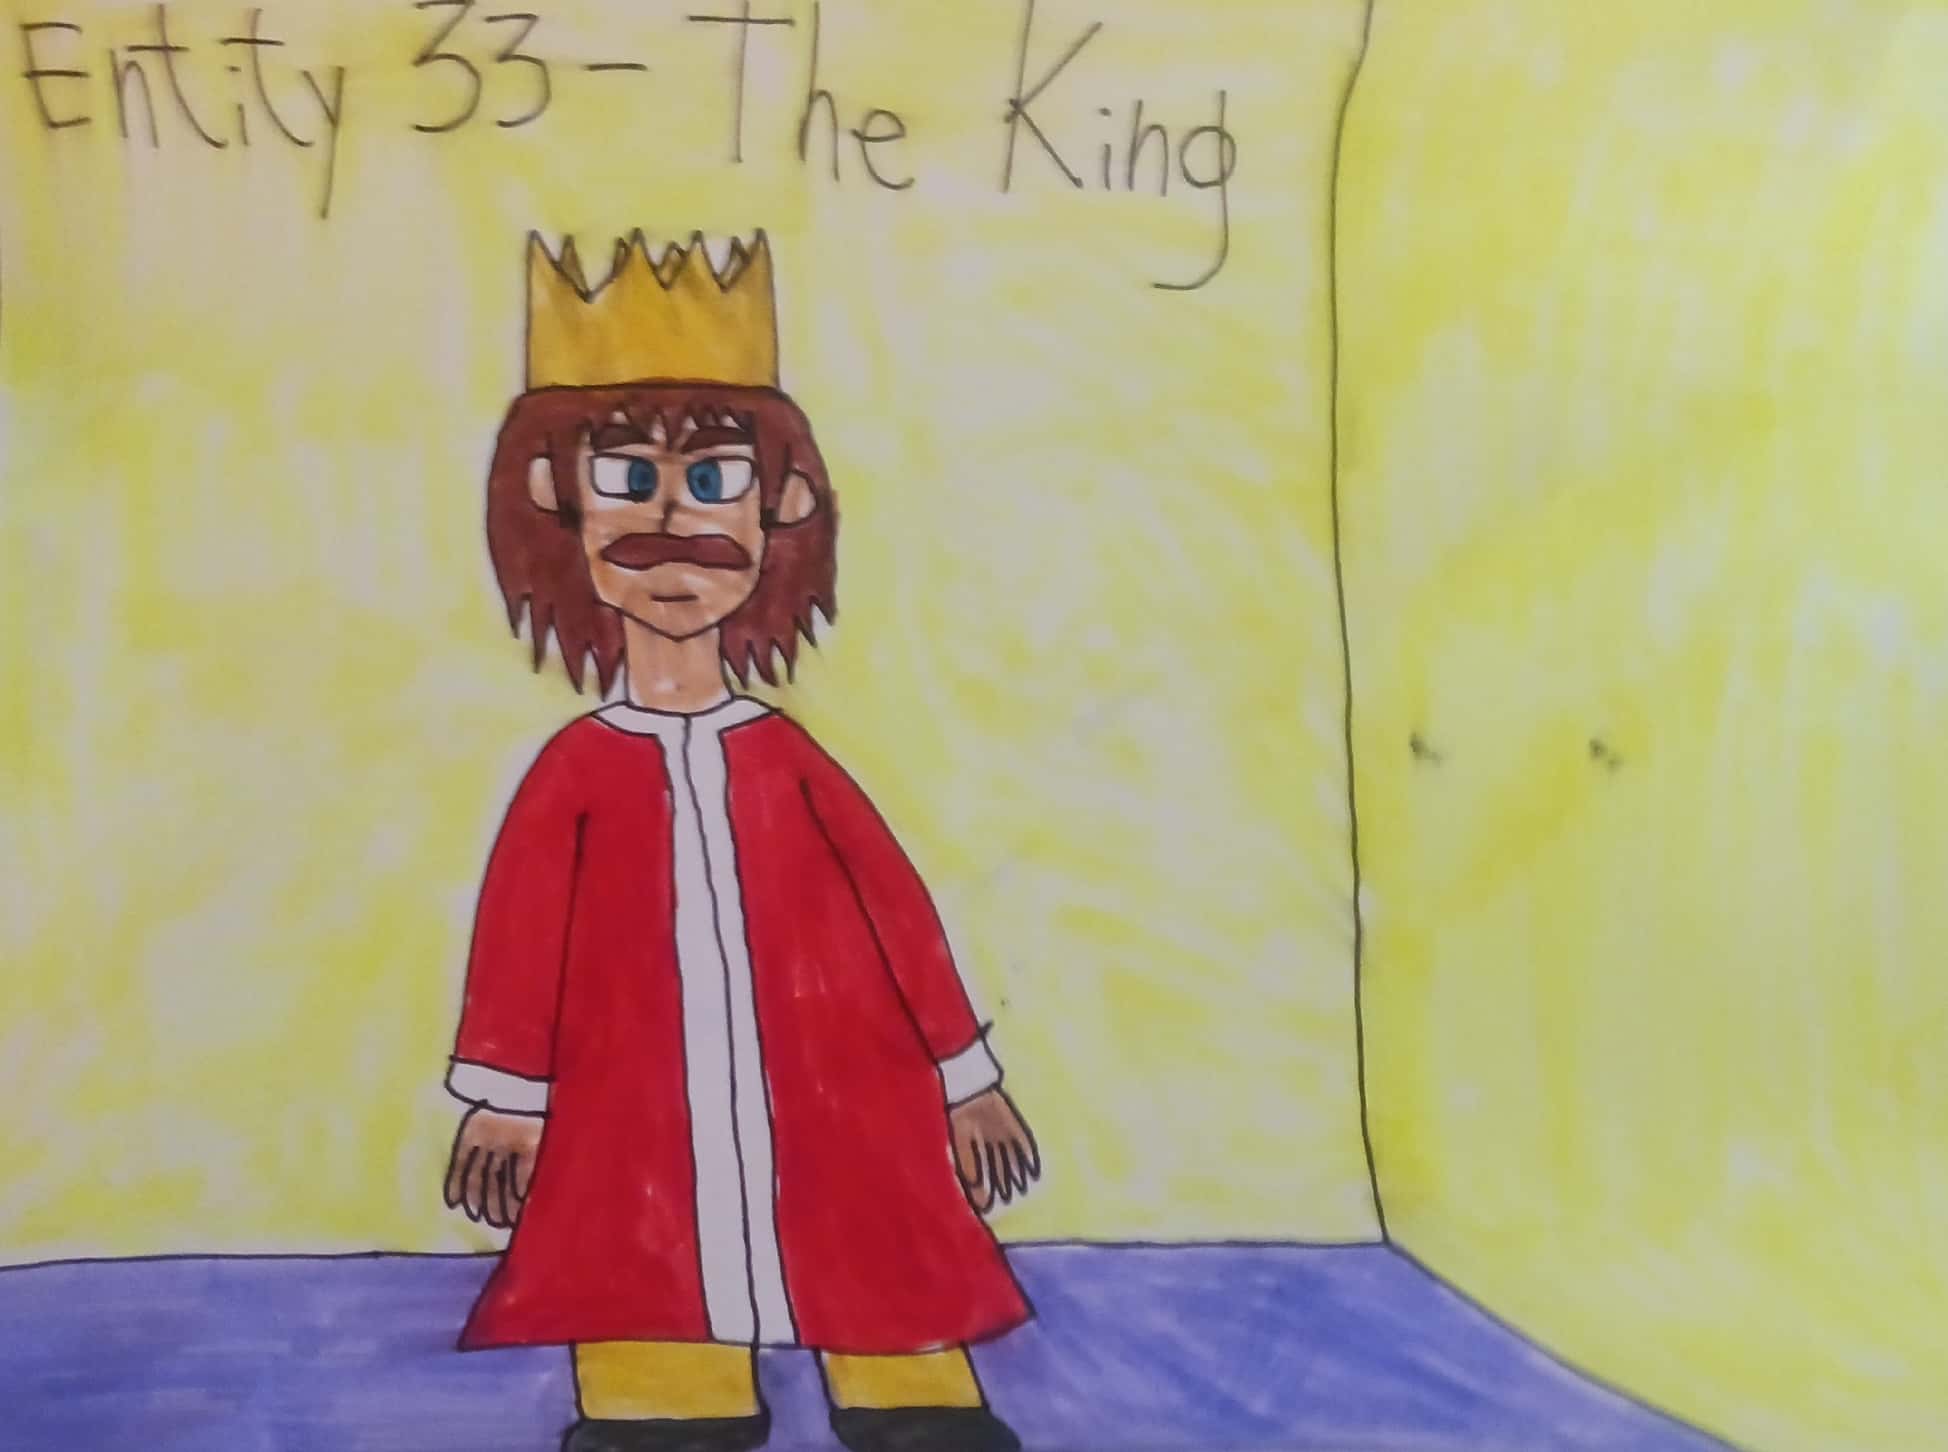 Backrooms Entity 33: The King by Cheshire345 on DeviantArt